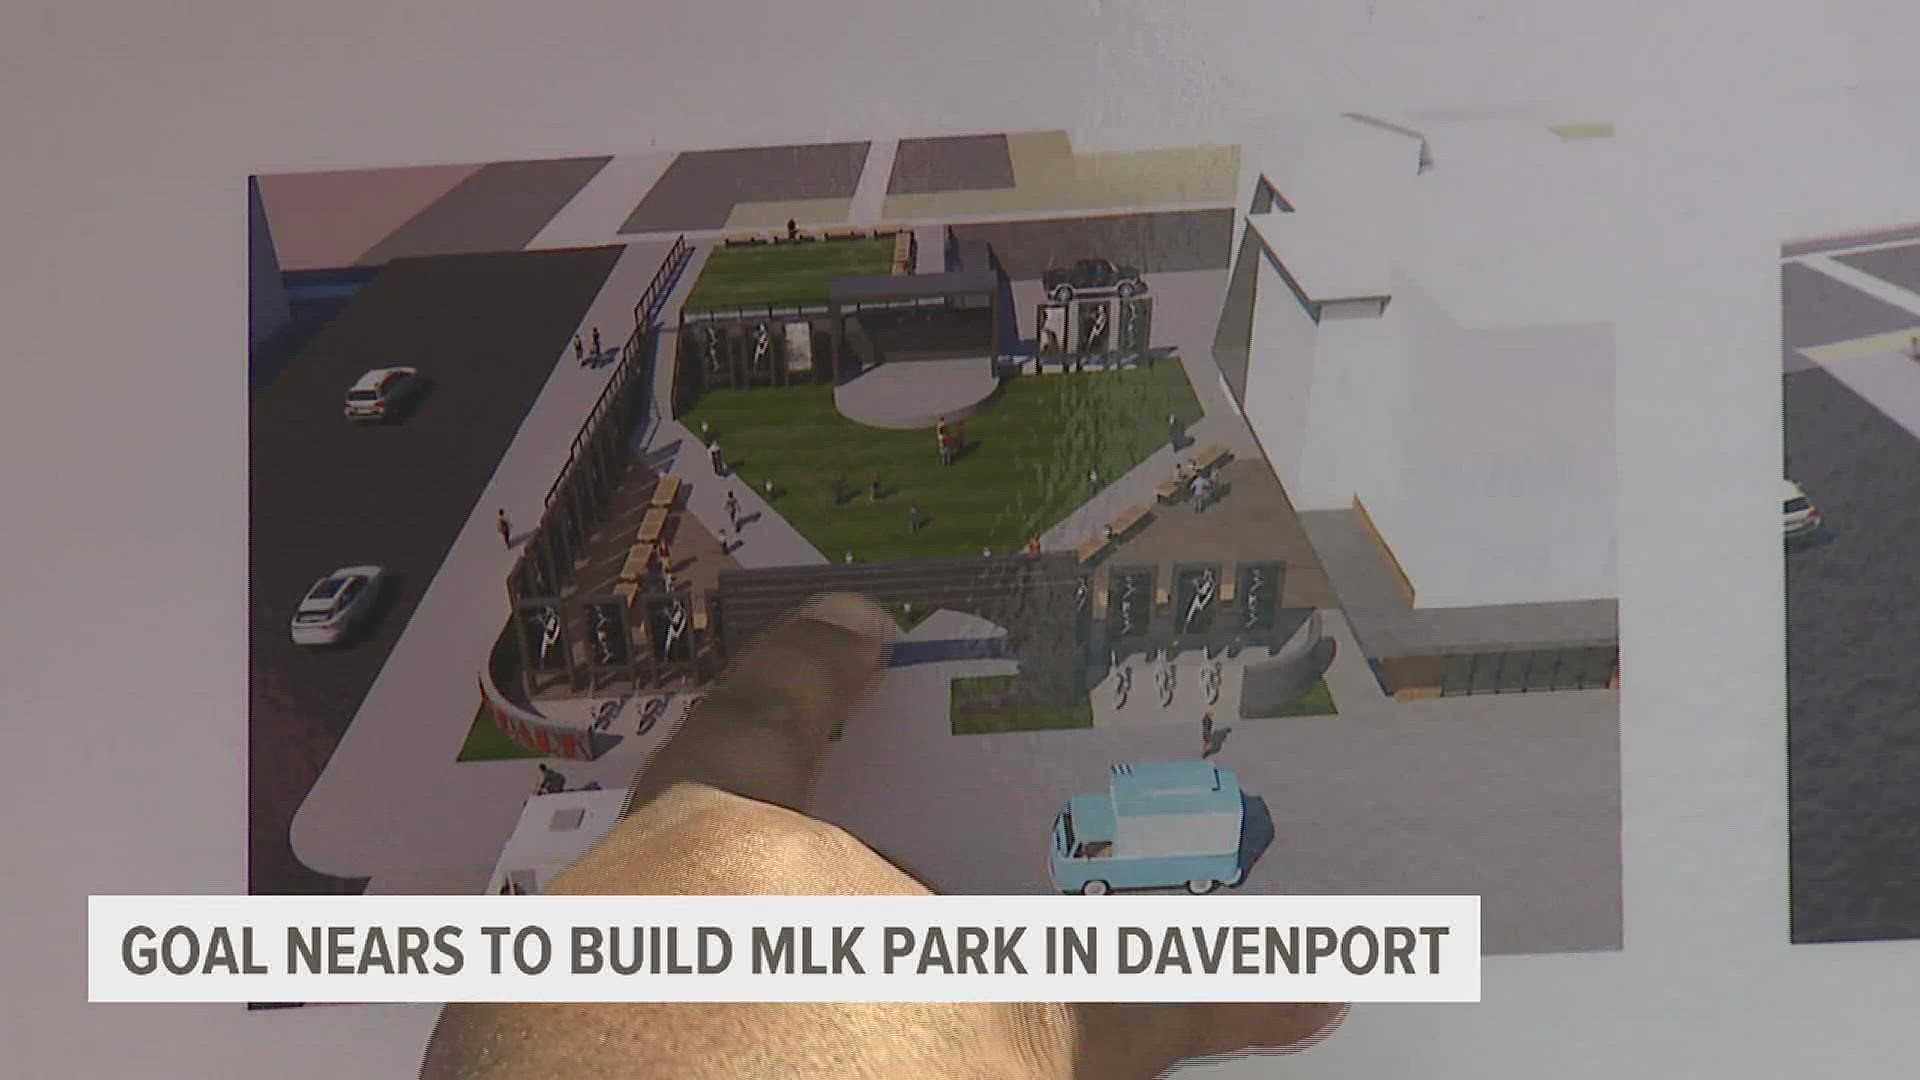 The park is expected to include entertainment, historical exhibits and food trucks located at 5th and Brady streets near downtown Davenport.